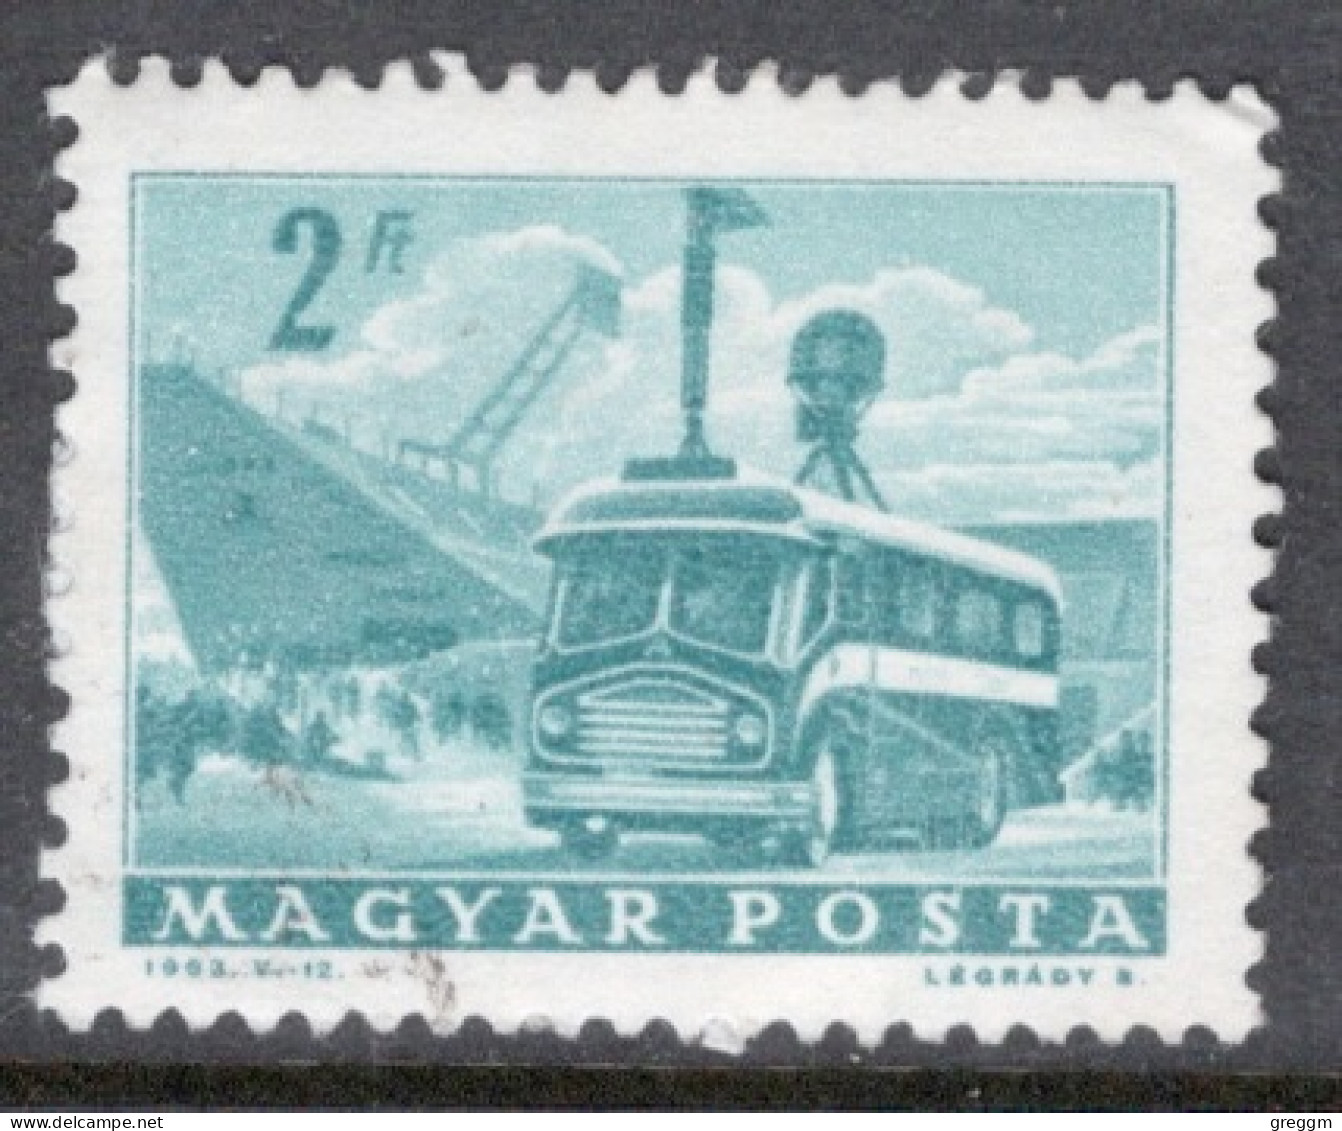 Hungary 1963 Single Stamp Celebrating Means Of Transport In Fine Used - Used Stamps